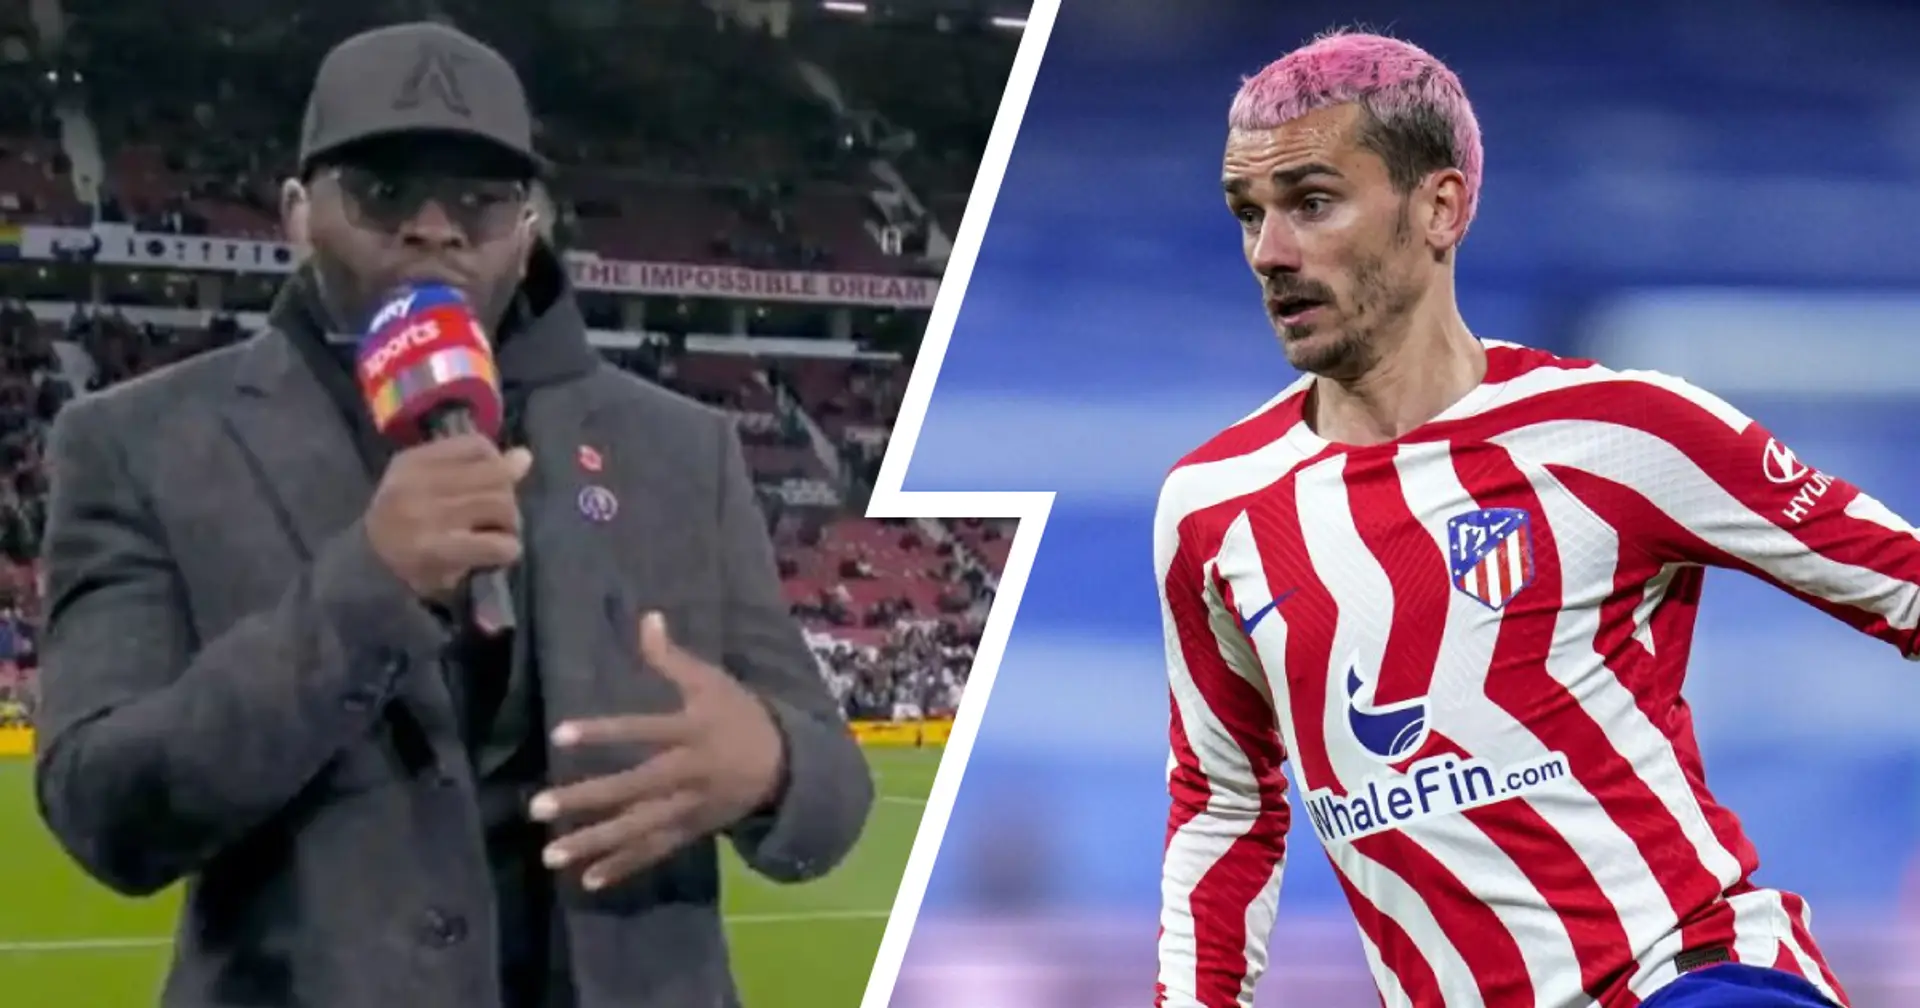 'He's still one of the very best players in the box': Louis Saha wants Man United to make shock Antoine Griezmann transfer